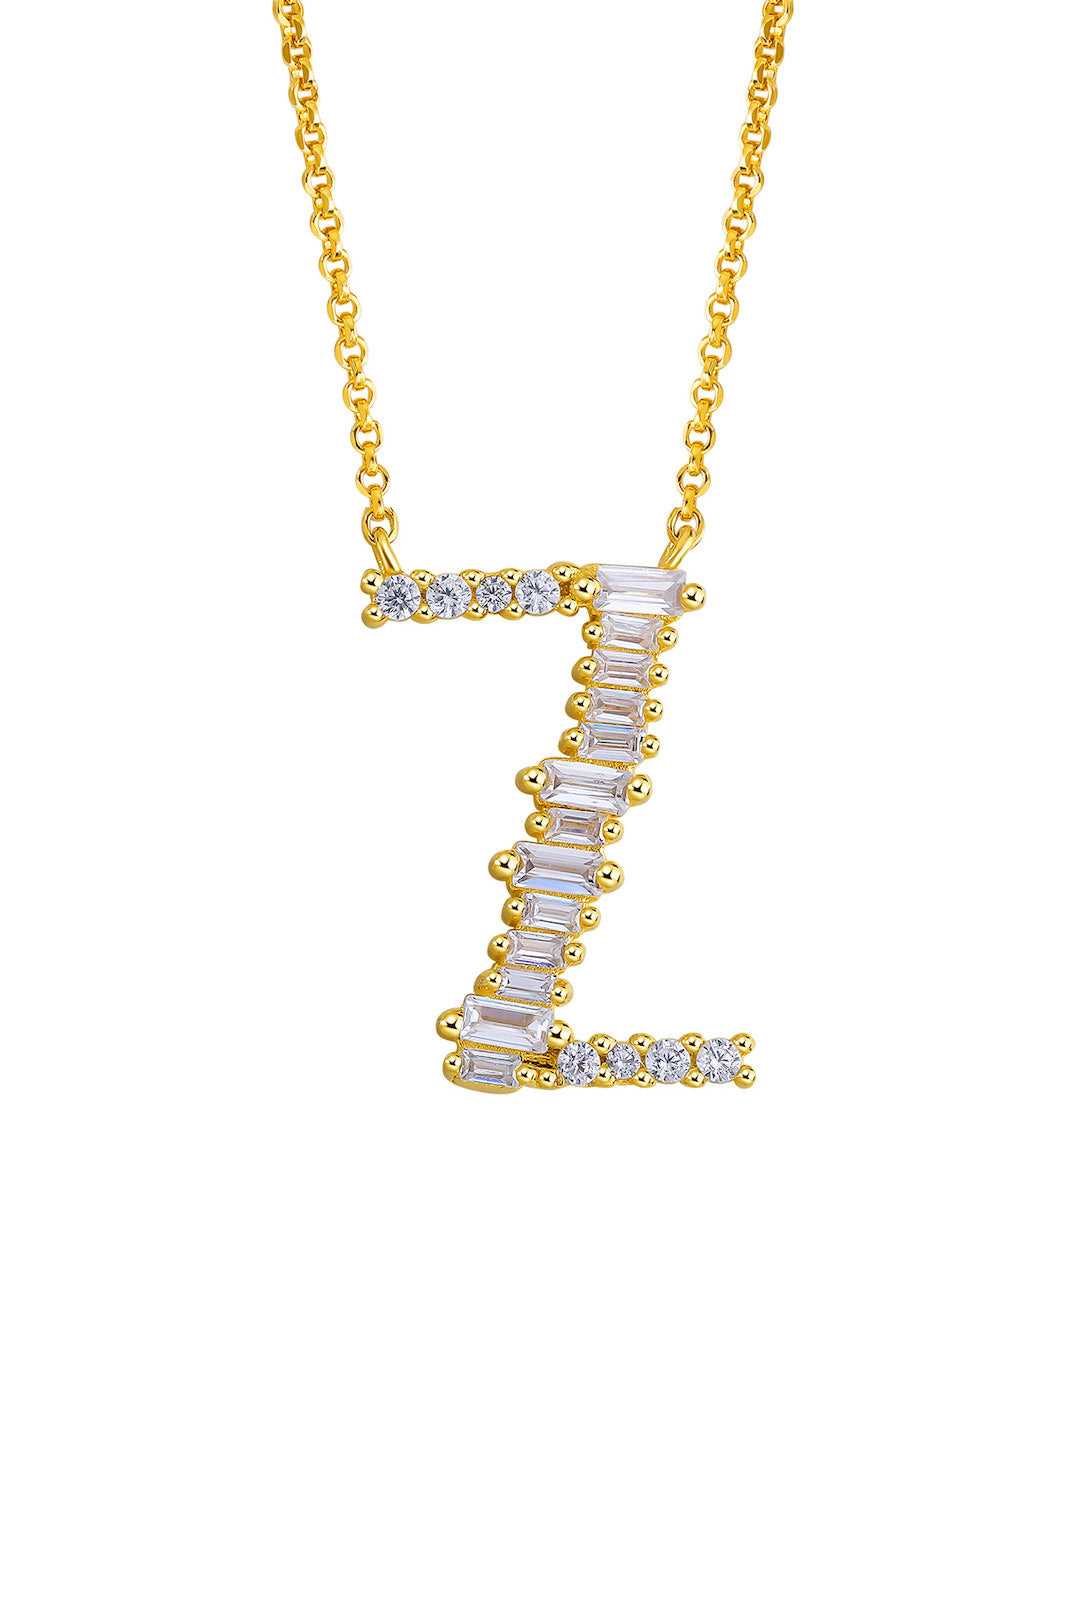 Gold Plated Sterling Silver Initial Necklace - Letter Z Detail